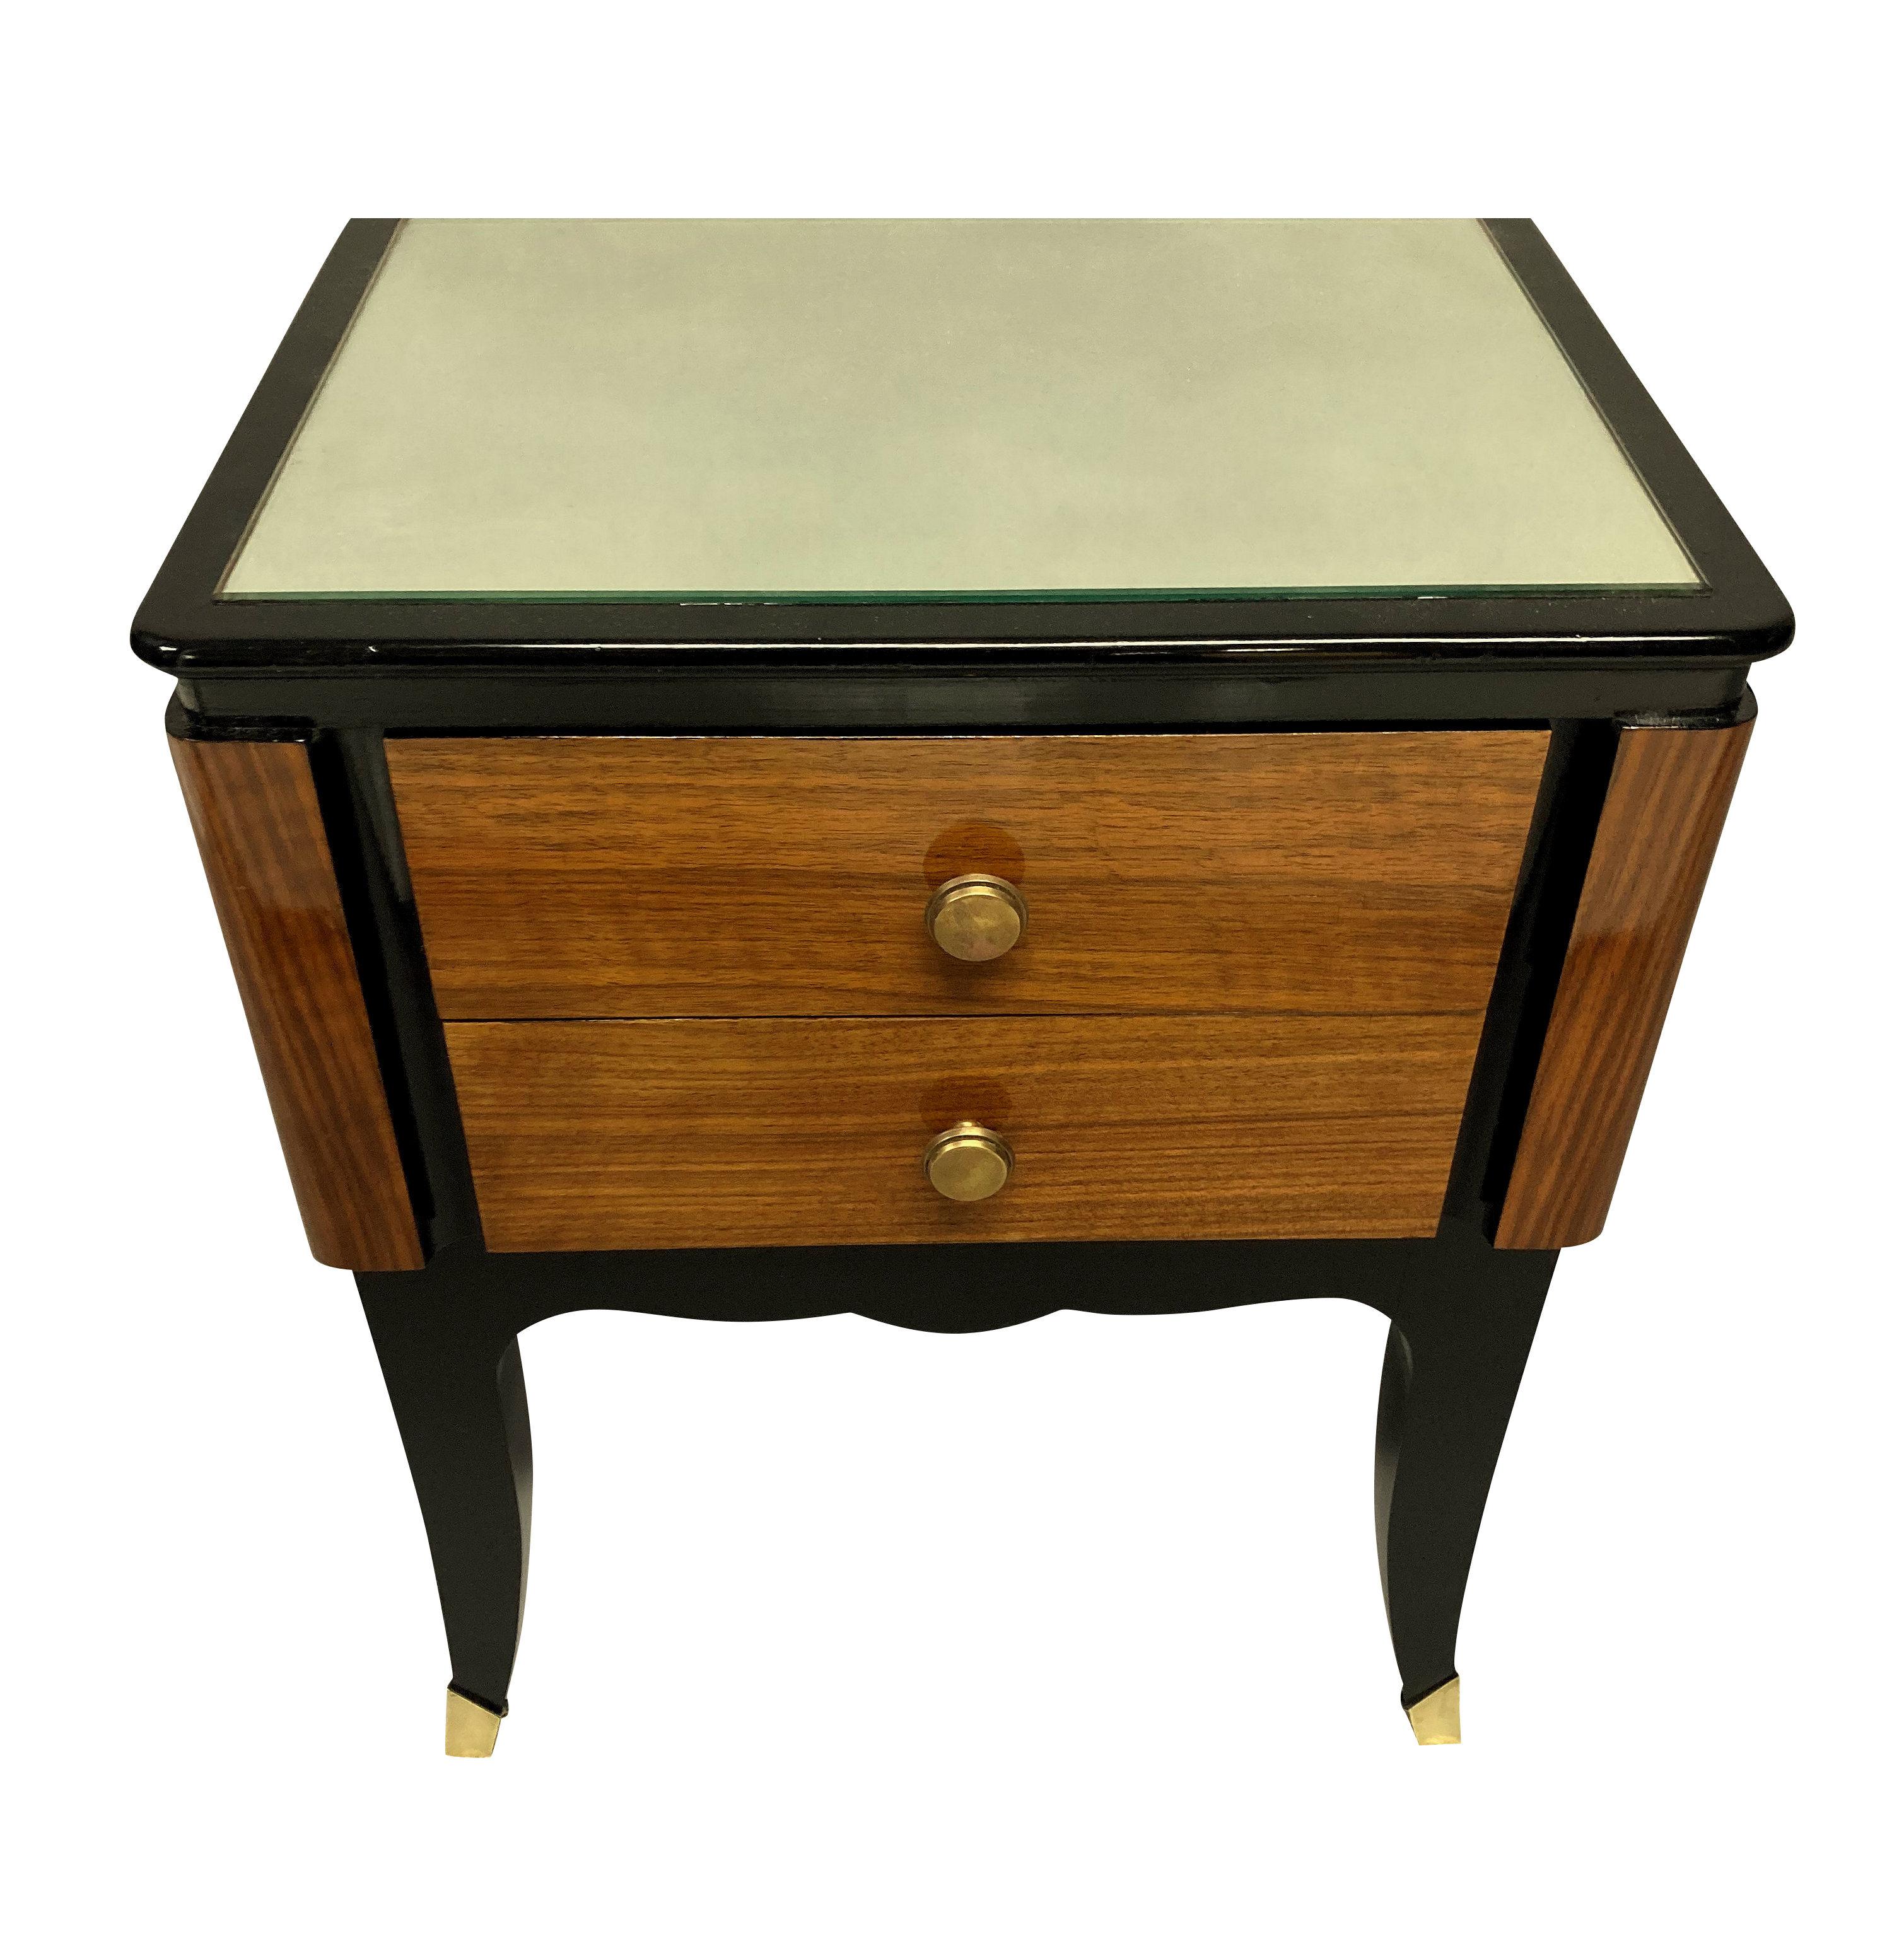 A pair of French midcentury night stands of good quality in rosewood with ebonised detail. With two drawers each, brass sabot feet and antiqued mirror glass tops.